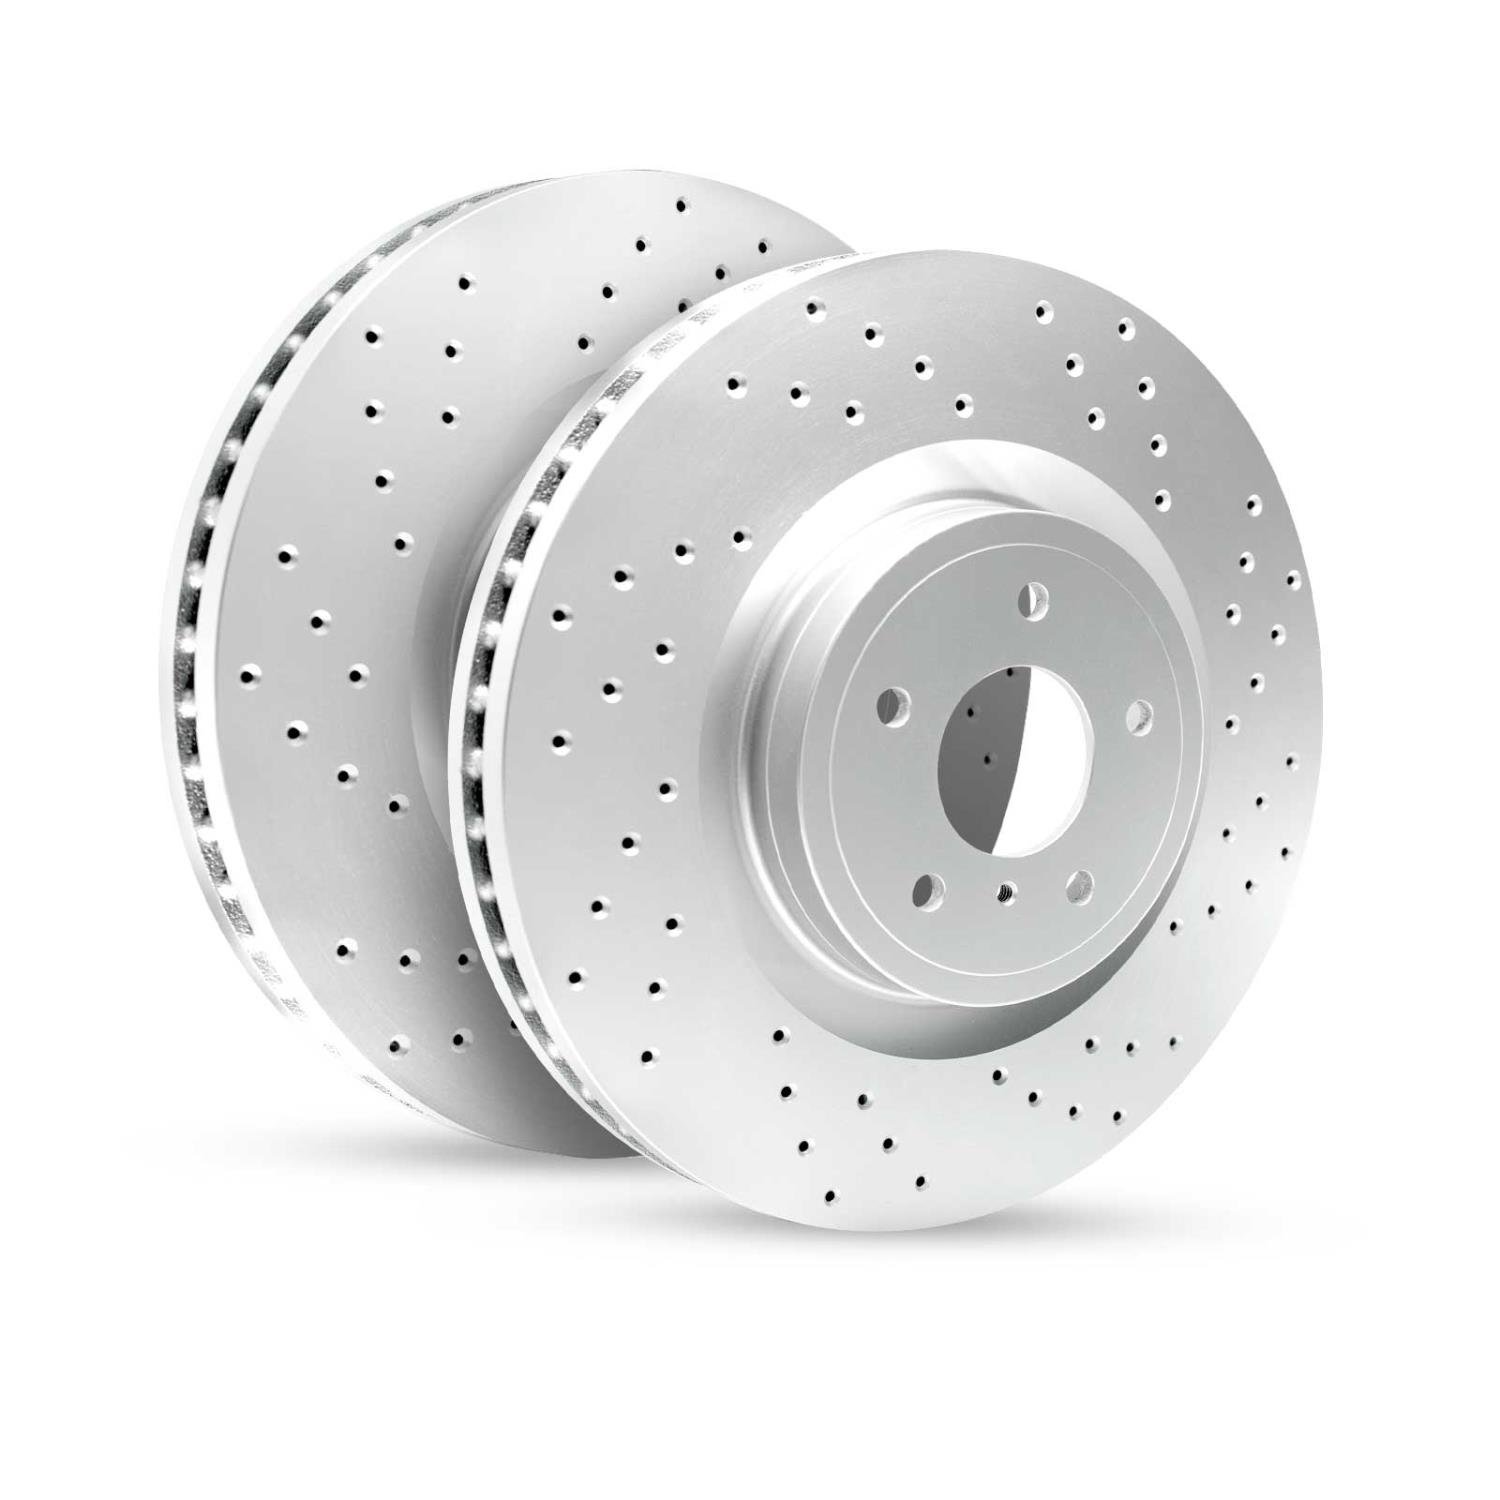 GEO-Carbon Drilled/Slotted Rotors, 1994-2004 Infiniti/Nissan, Position: Rear